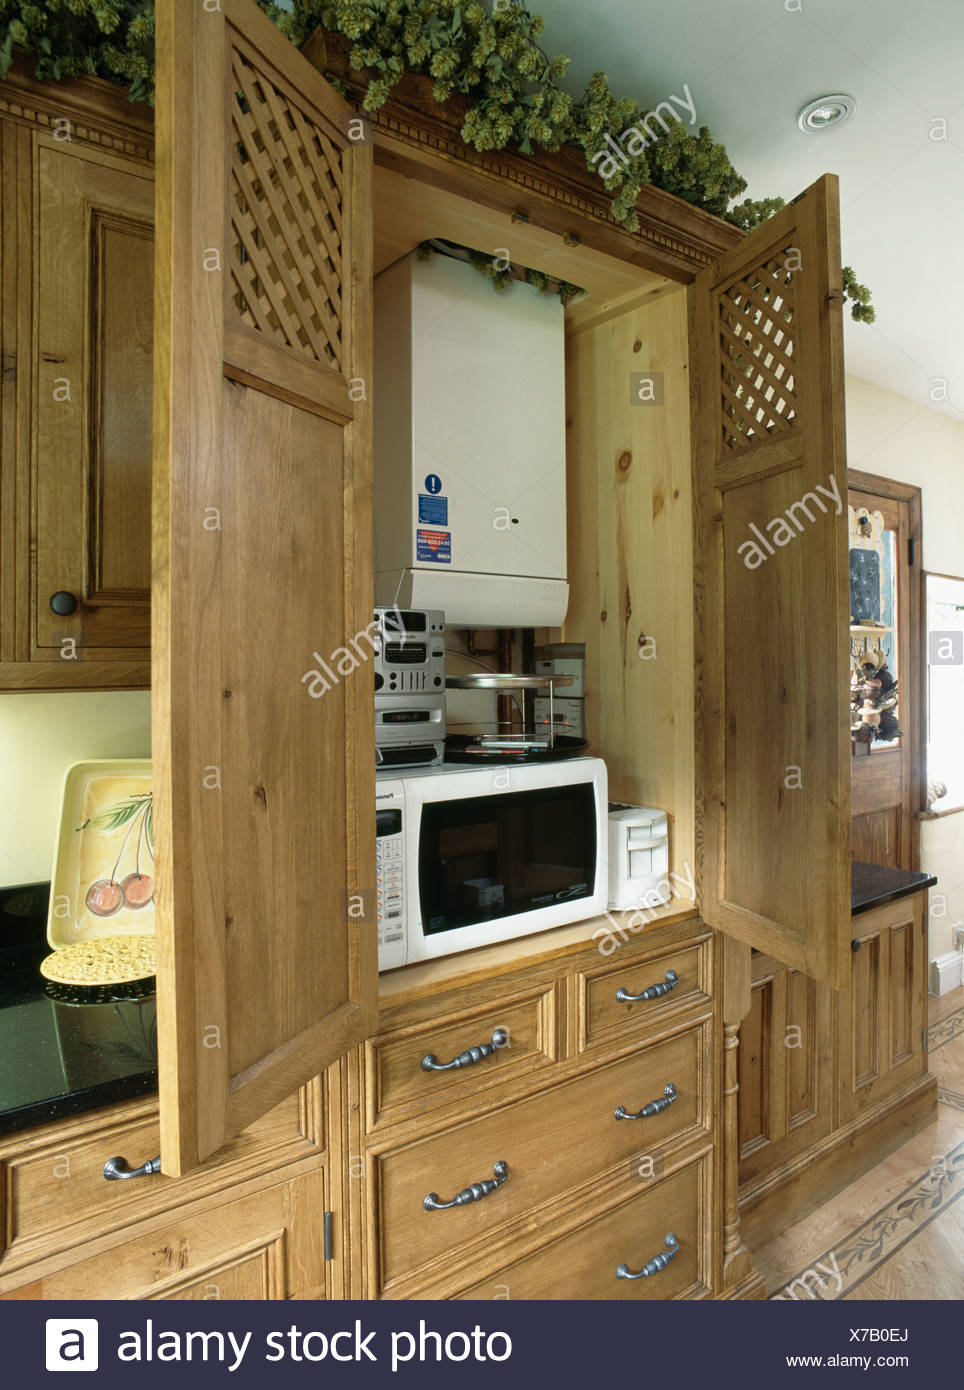 Oak Kitchen Cupboard With Doors Open To Show Central Heating